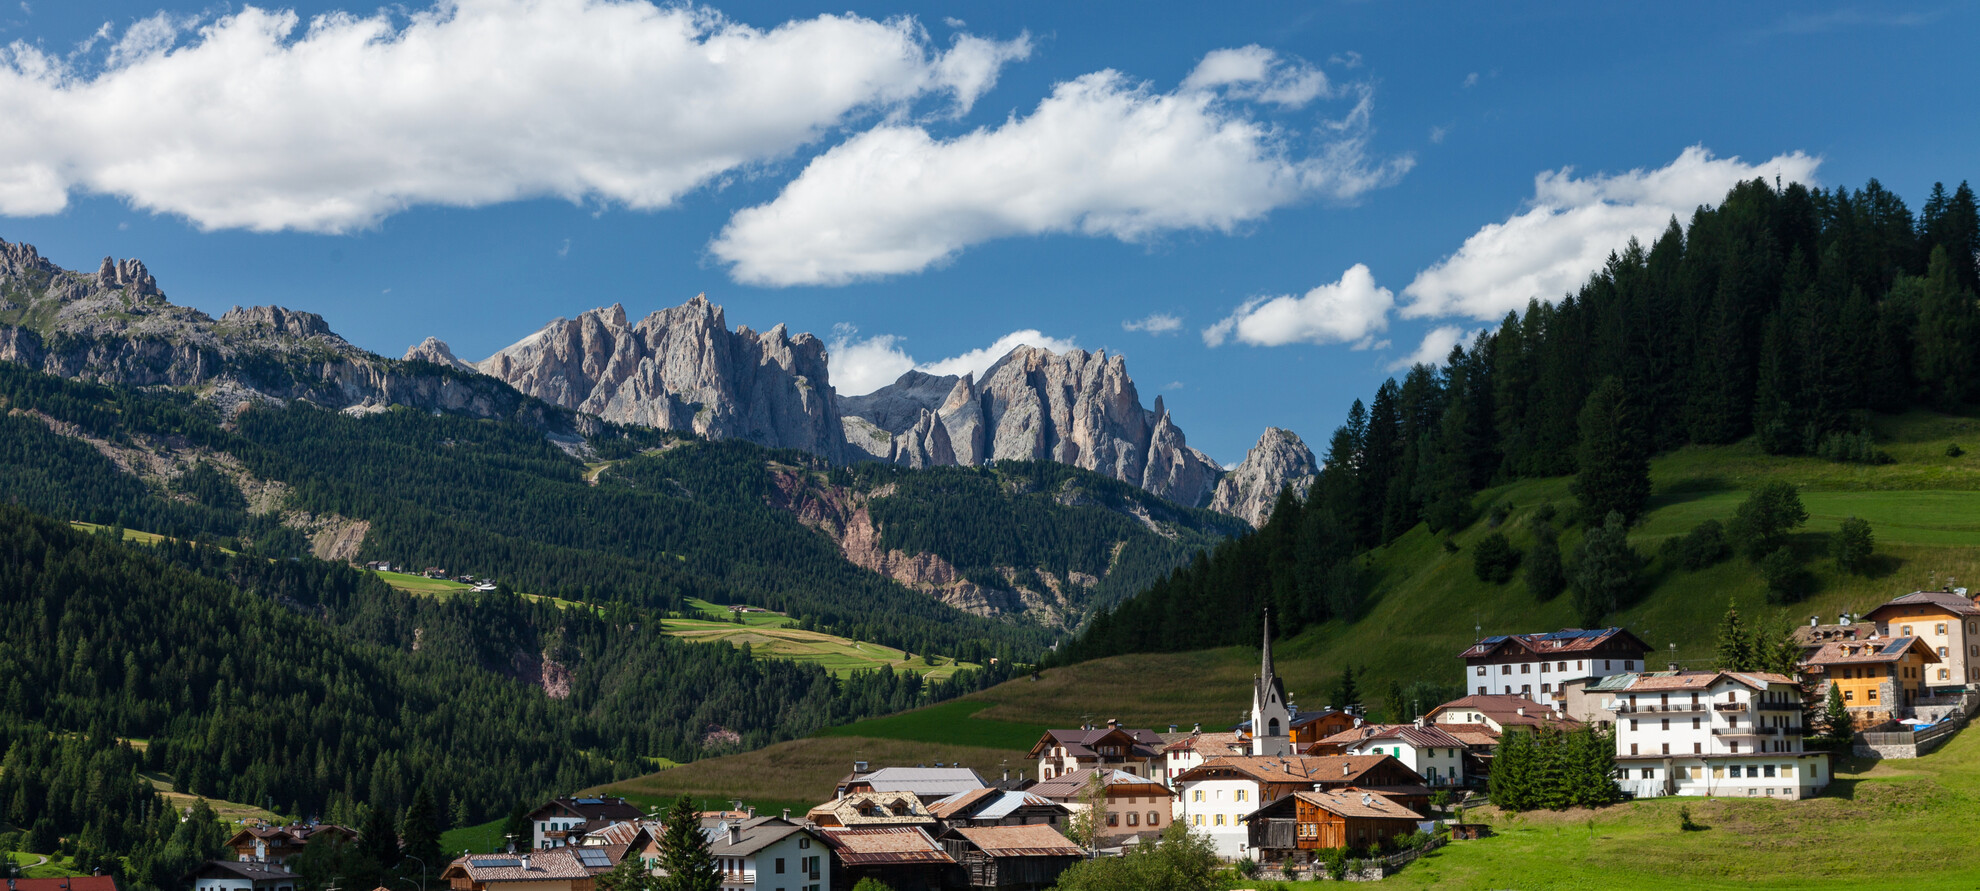 Val di Fassa - Moena - Located at the feet of the most beautiful Dolomites in Trentino